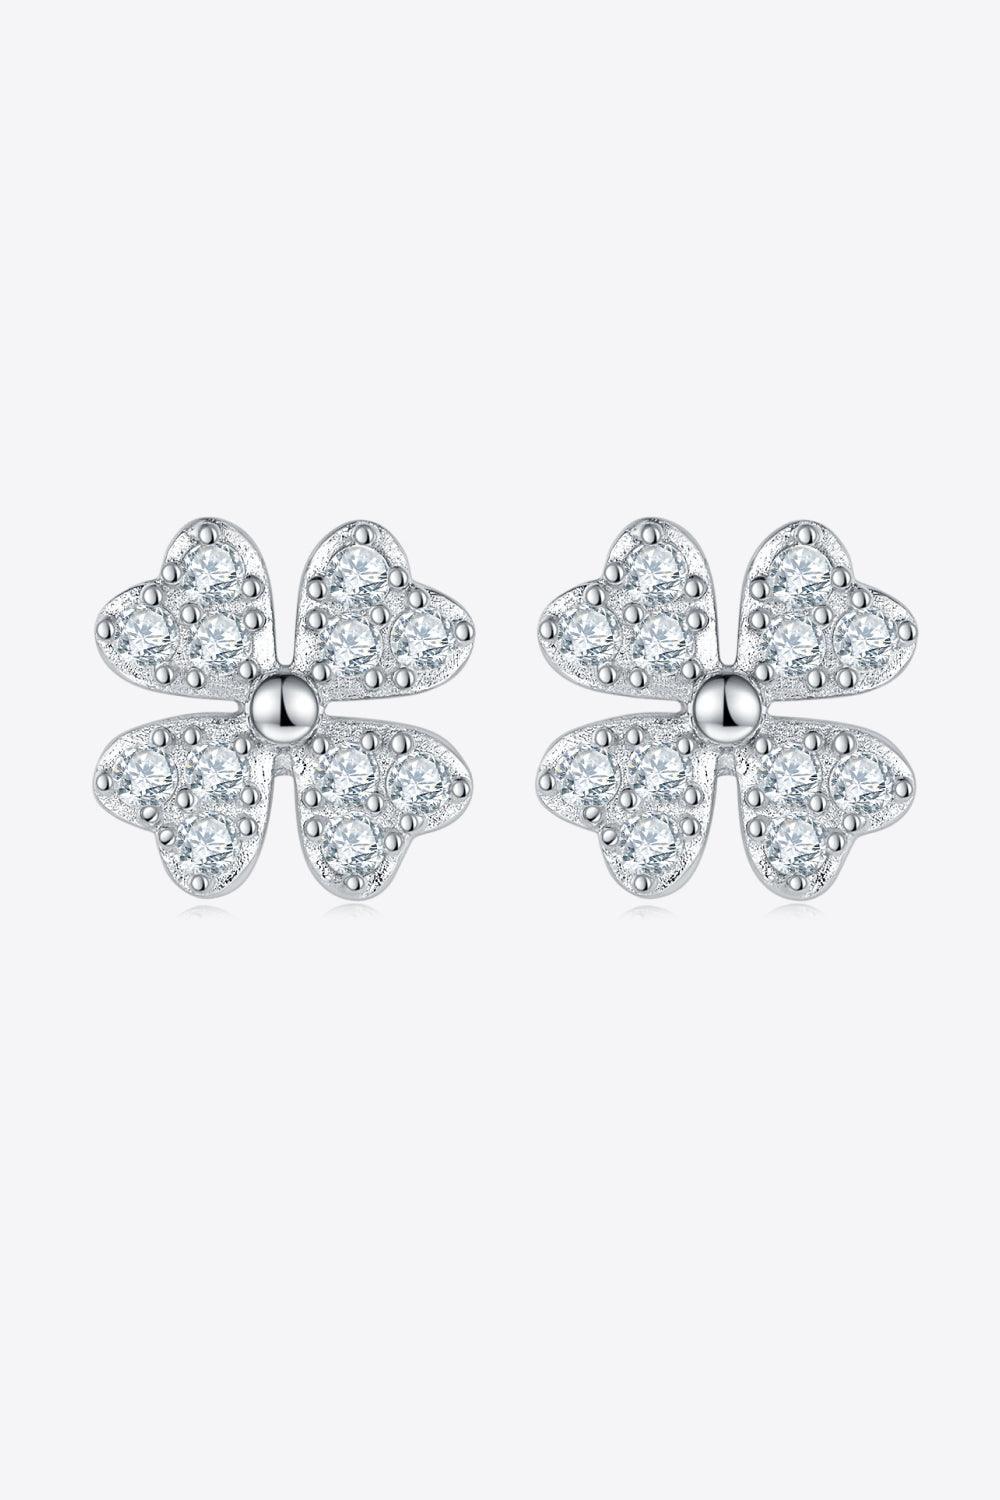 Stand Out Four Leaf Clover Moissanite Stud Earrings - MXSTUDIO.COM